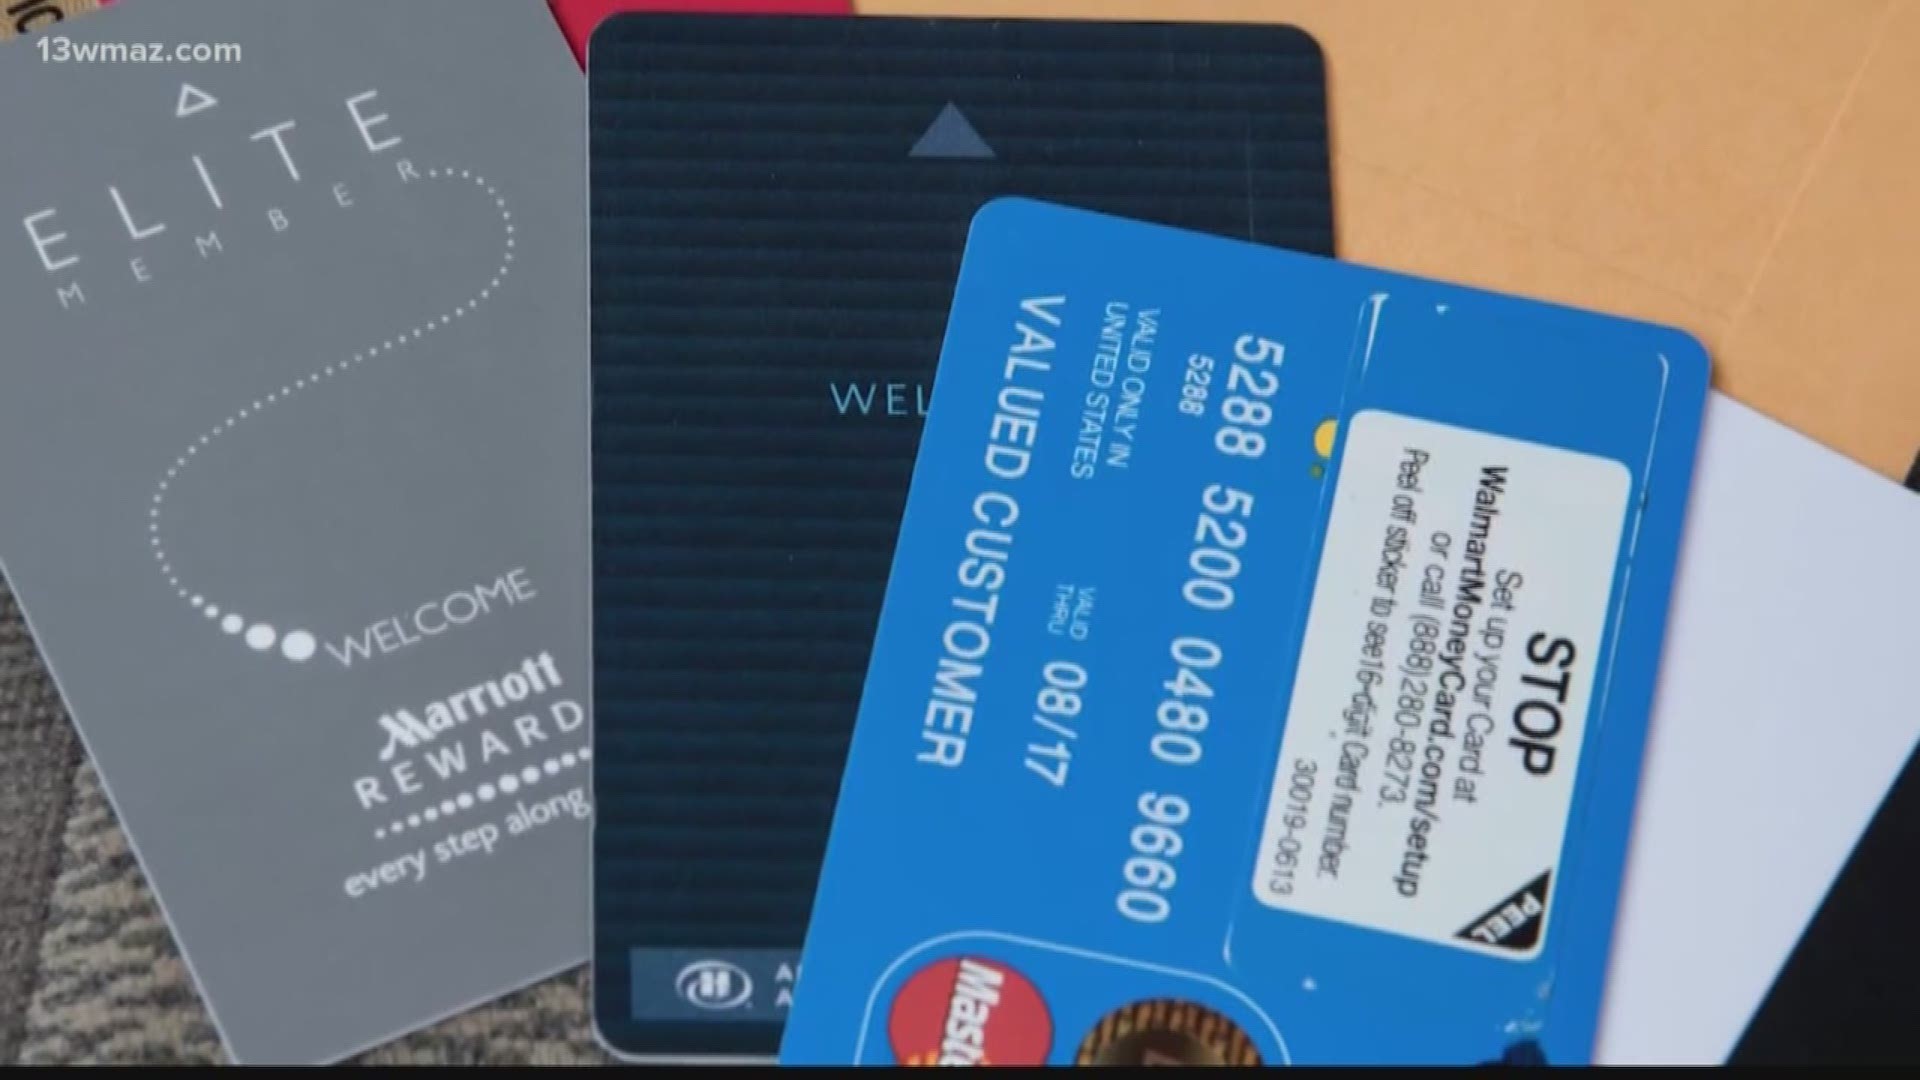 In 2018, the Macon-Bibb metro area had the nation's highest rate of identity theft complaints. That's according to a new report from Federal Trade Commission. One investigator calls identity theft one of the fastest-growing types of crimes.